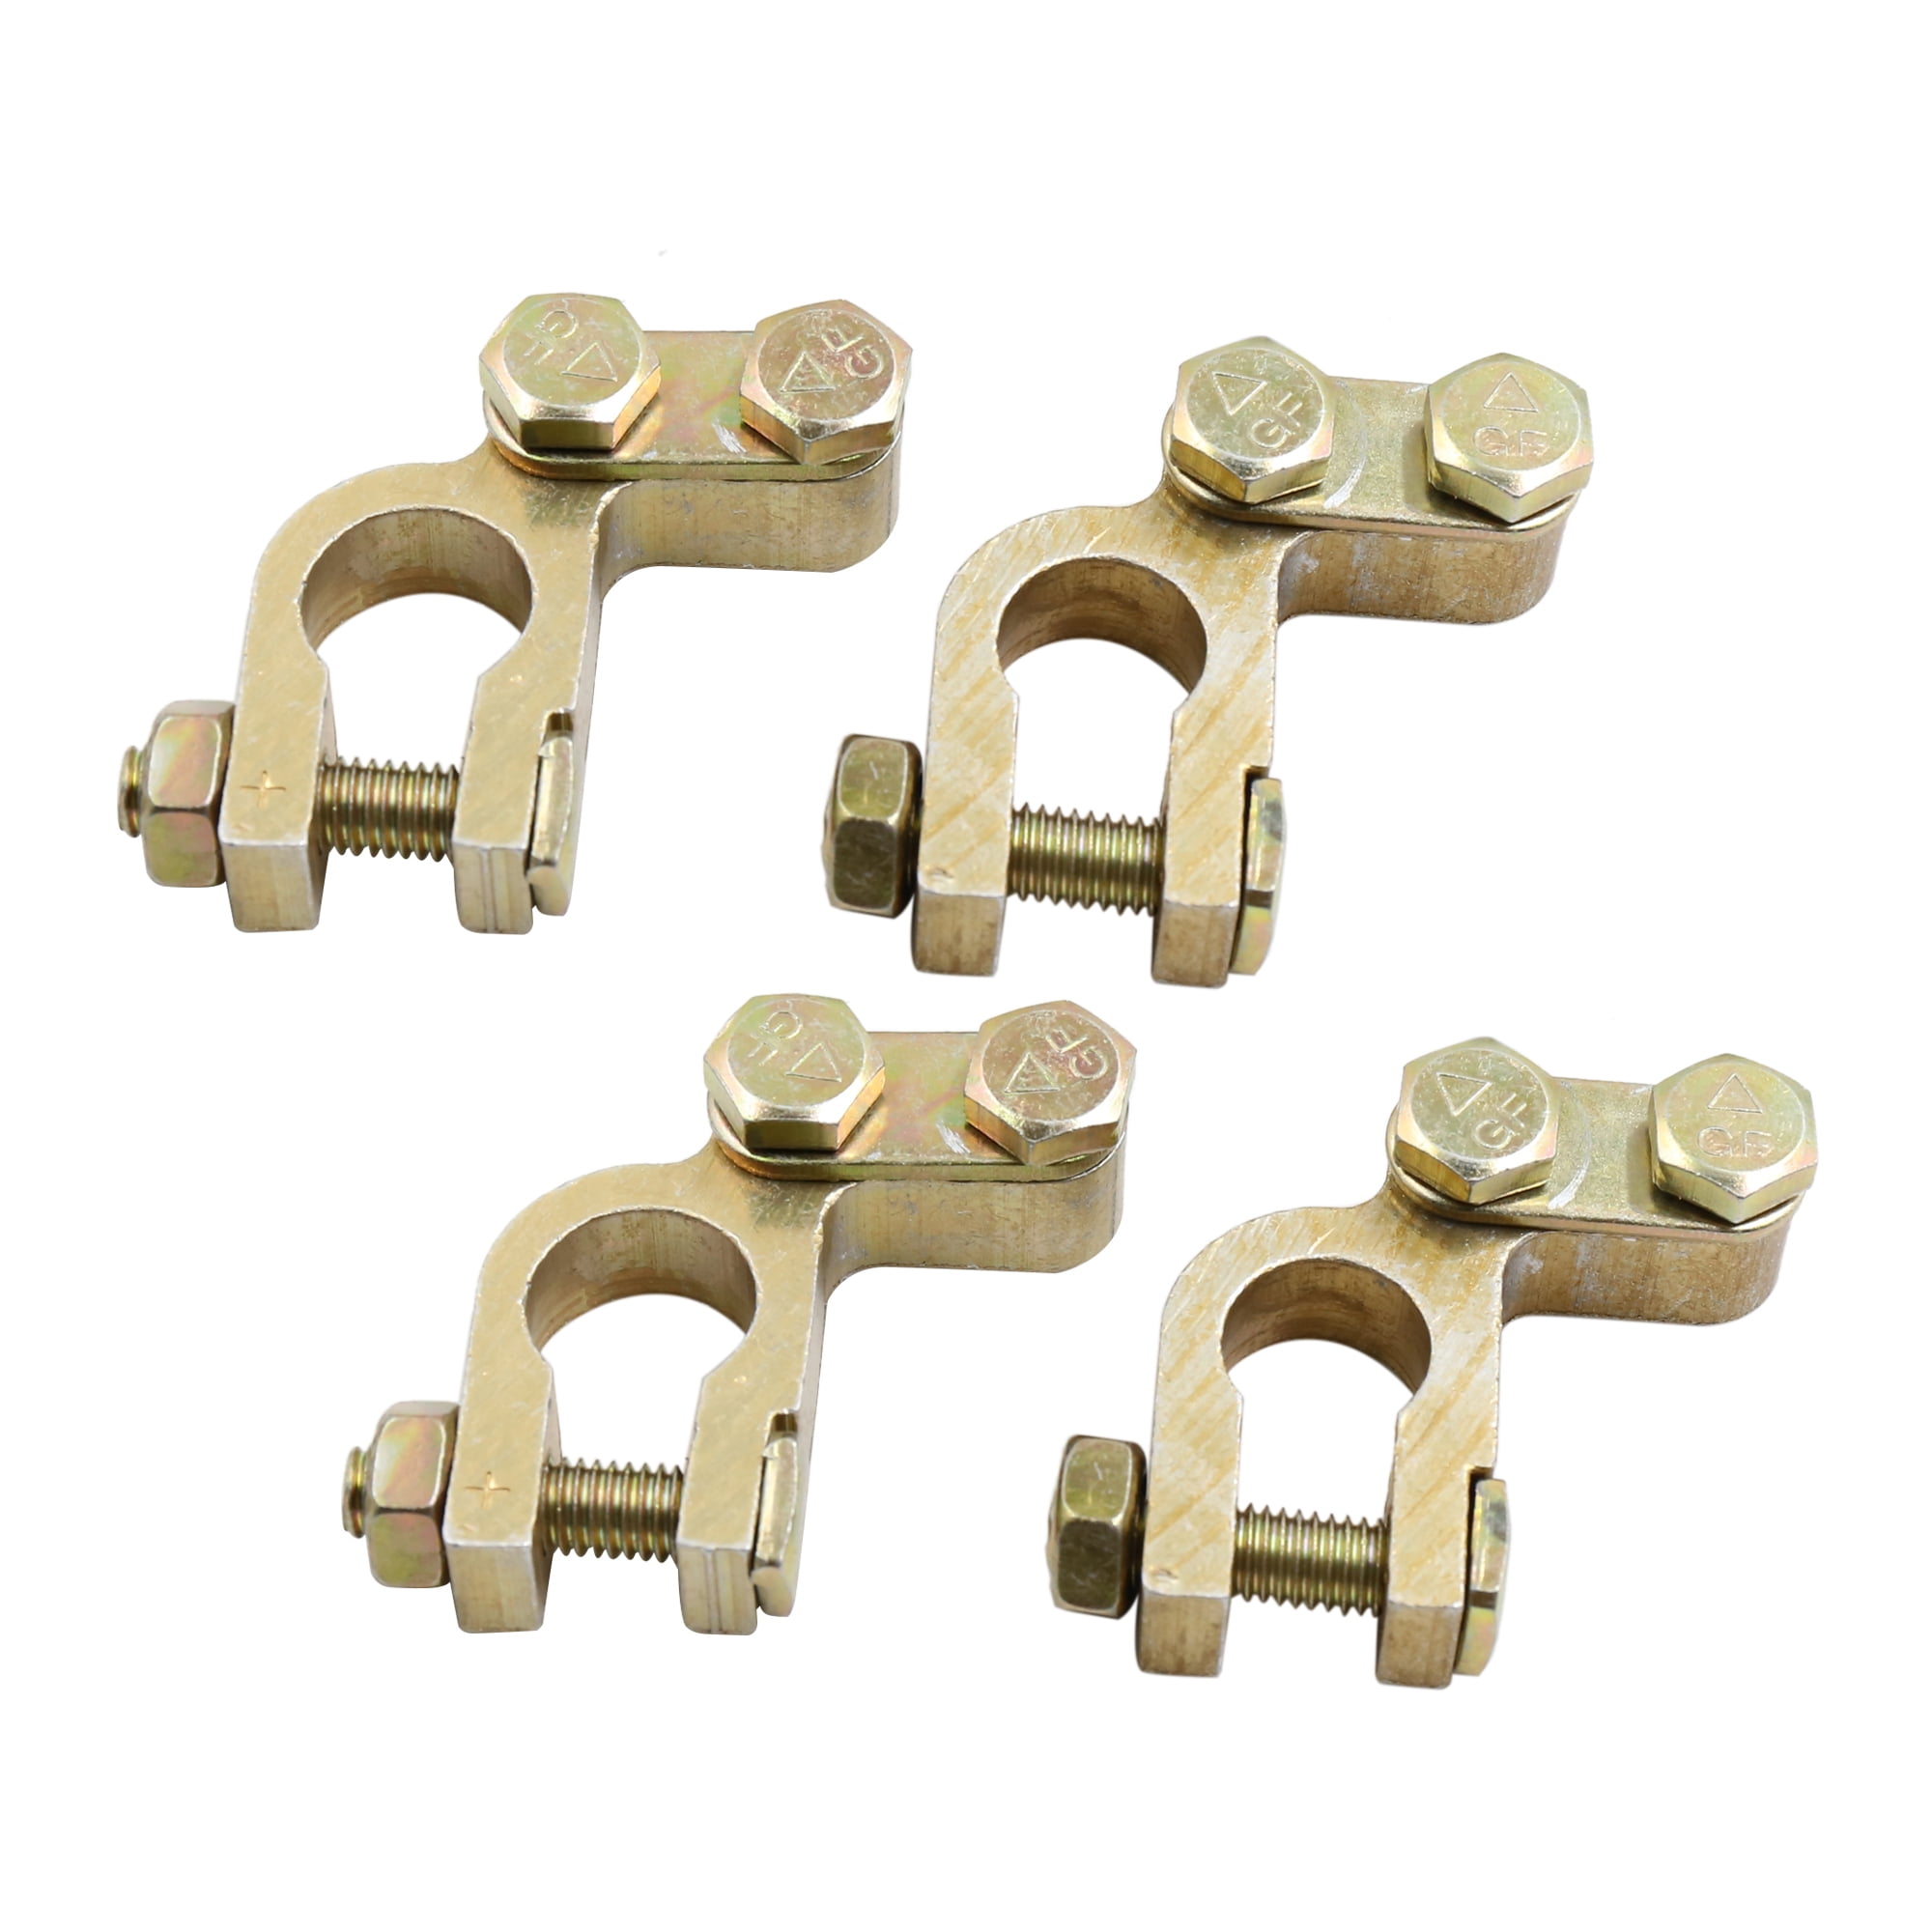 16-18mm Car Battery Cable Terminal Clamp Connectors Negative and Positive Copper 